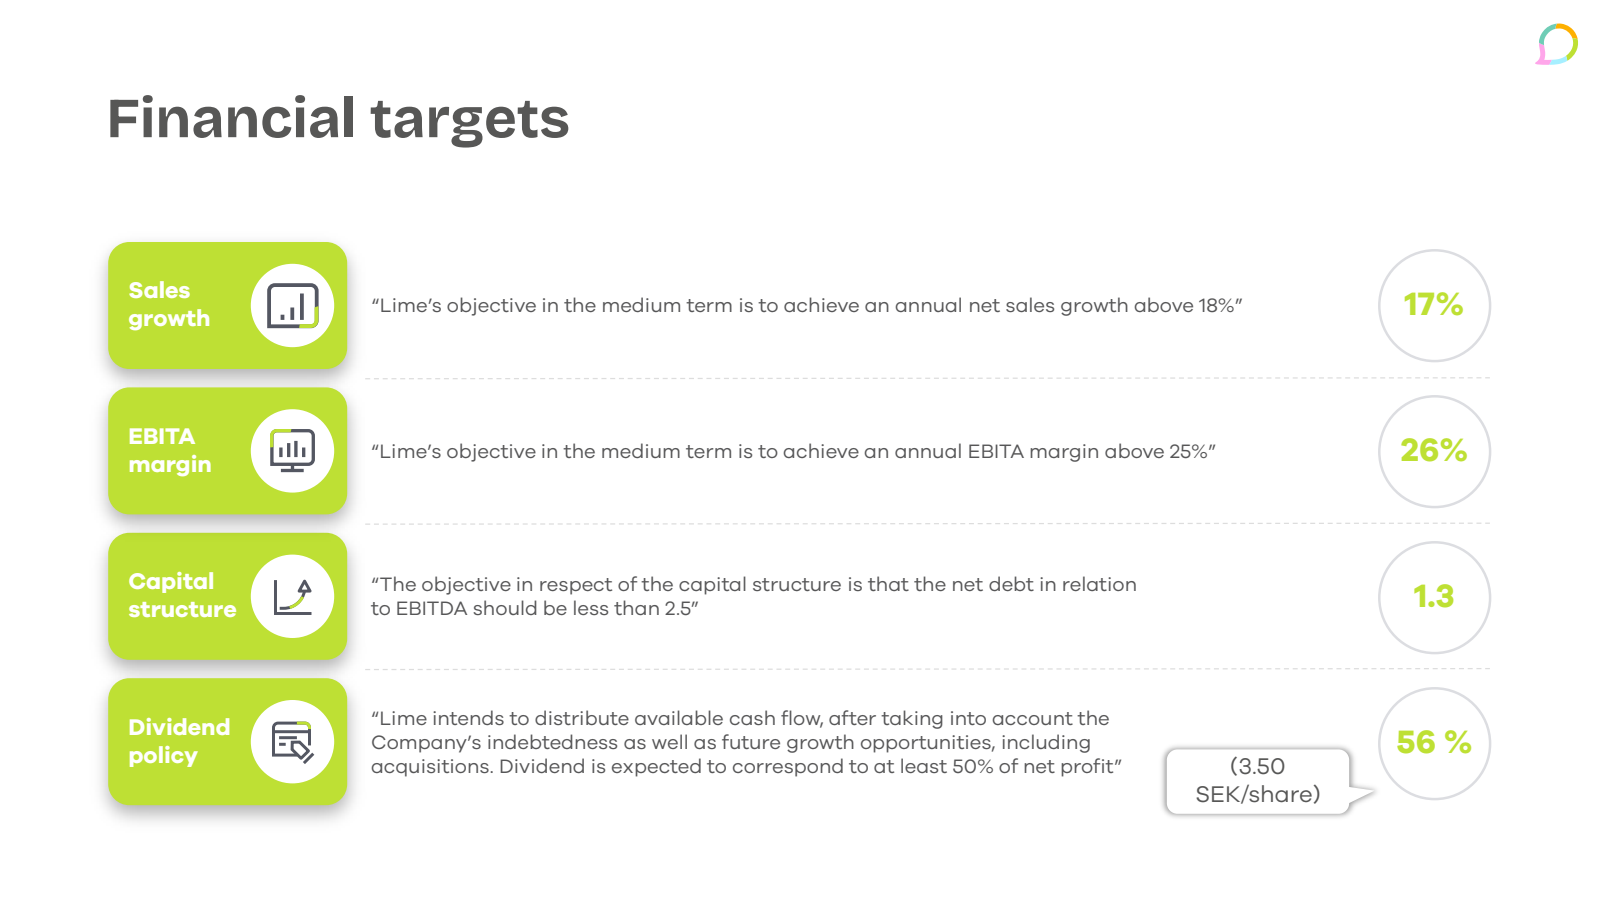 Financial targets 

